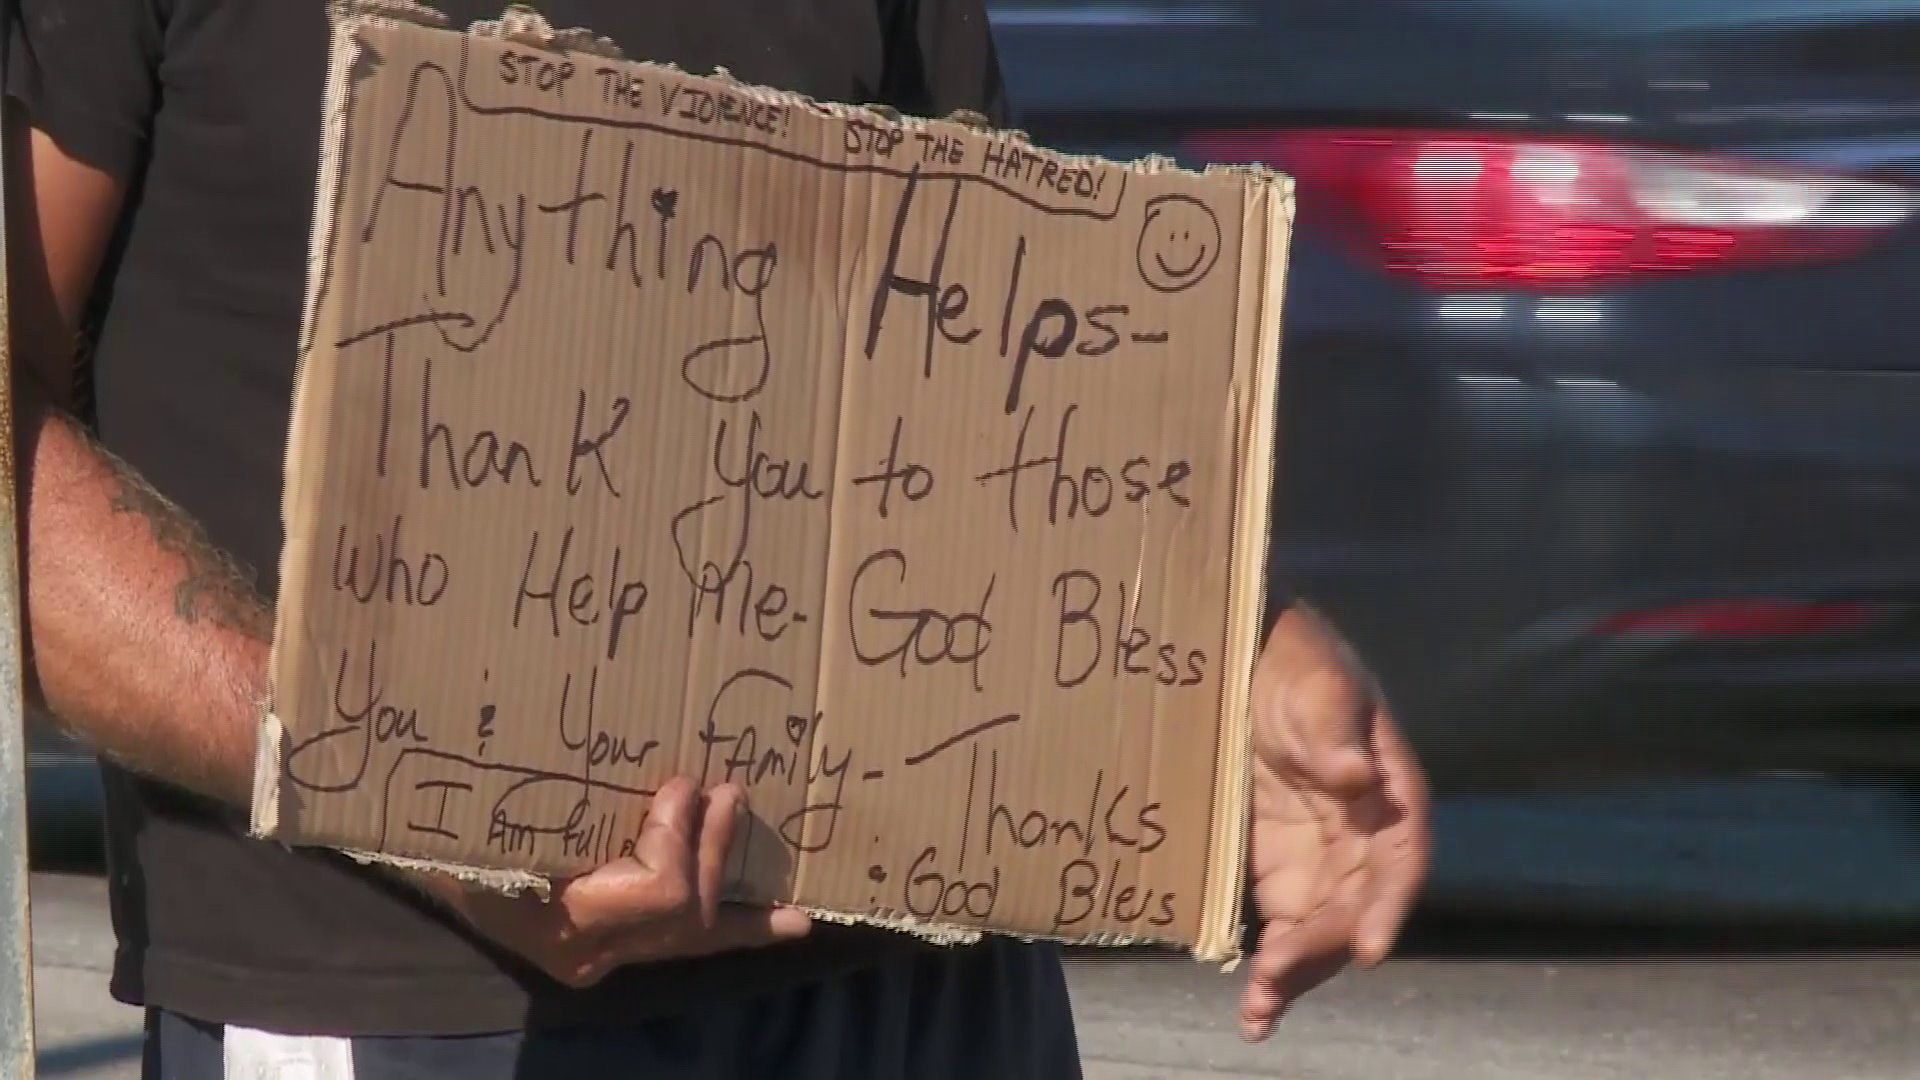 Panhandling is protected under the U.S. first amendment.